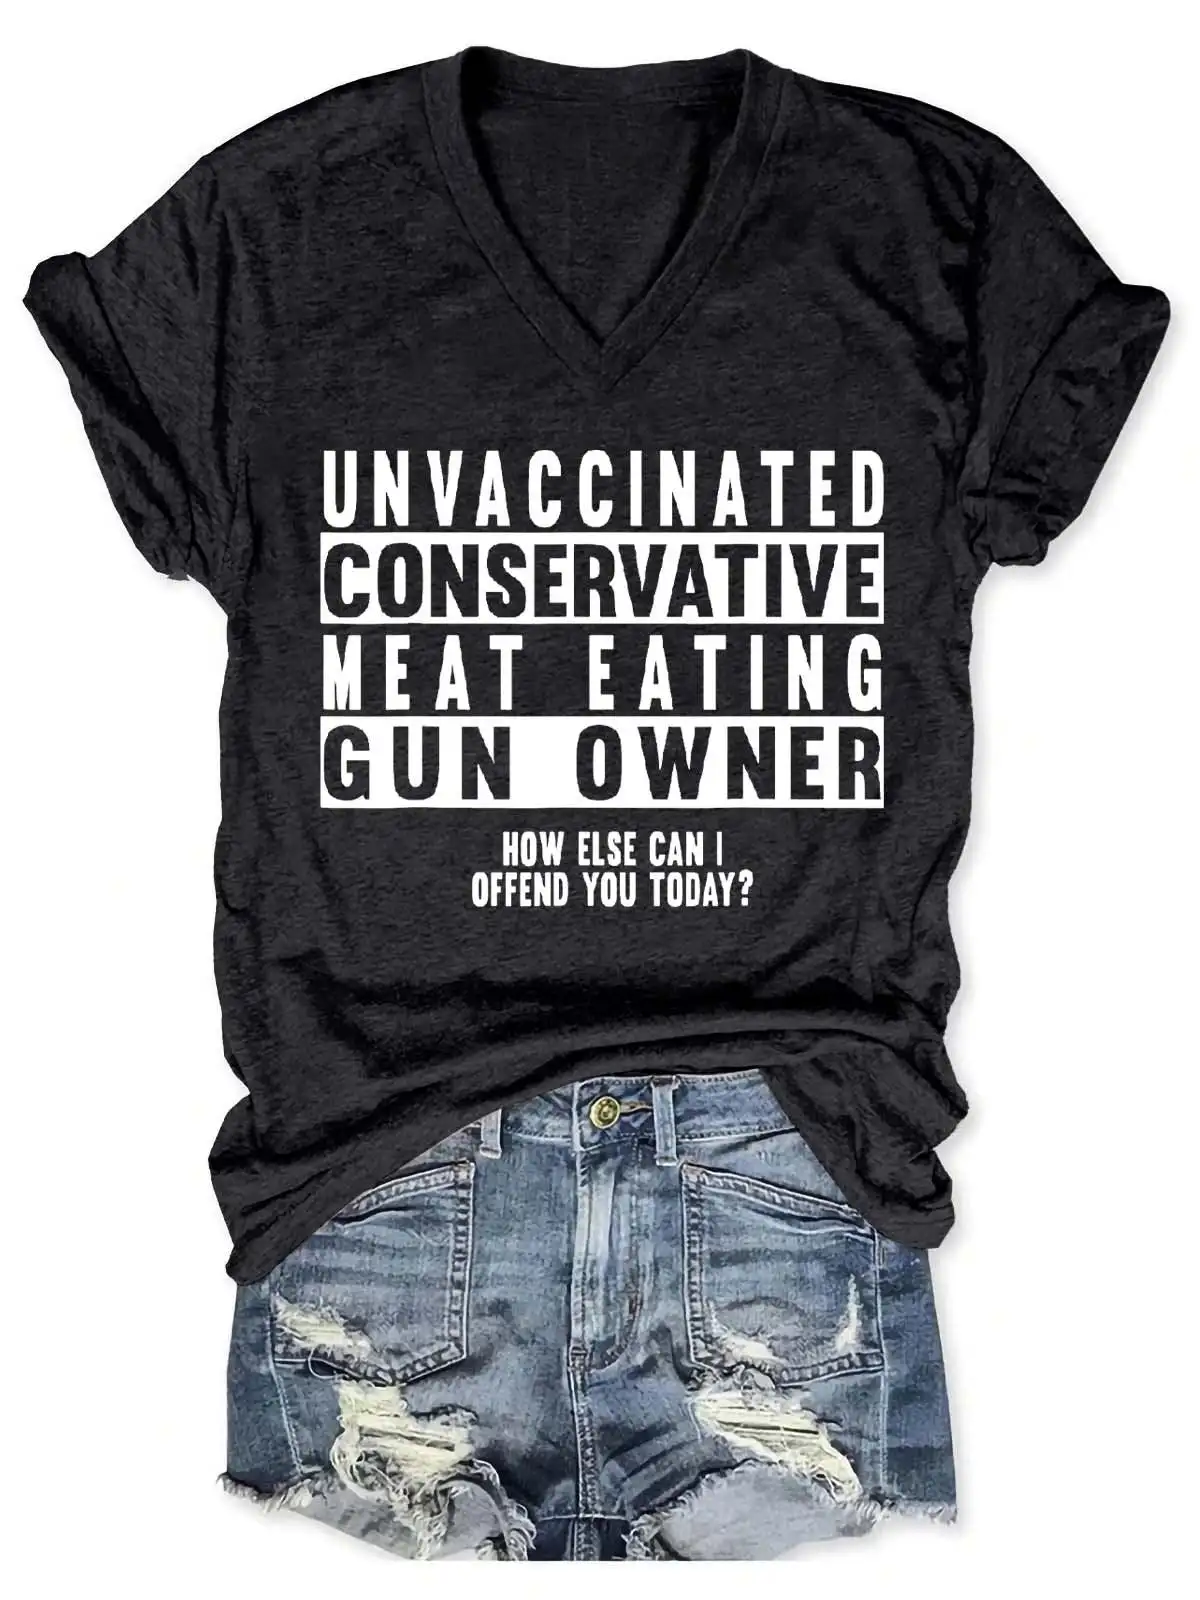 Lovessales Women's Unvaccinated Conservative Meat Eating Gun Owner V-Neck  100% Cotton T-shirt